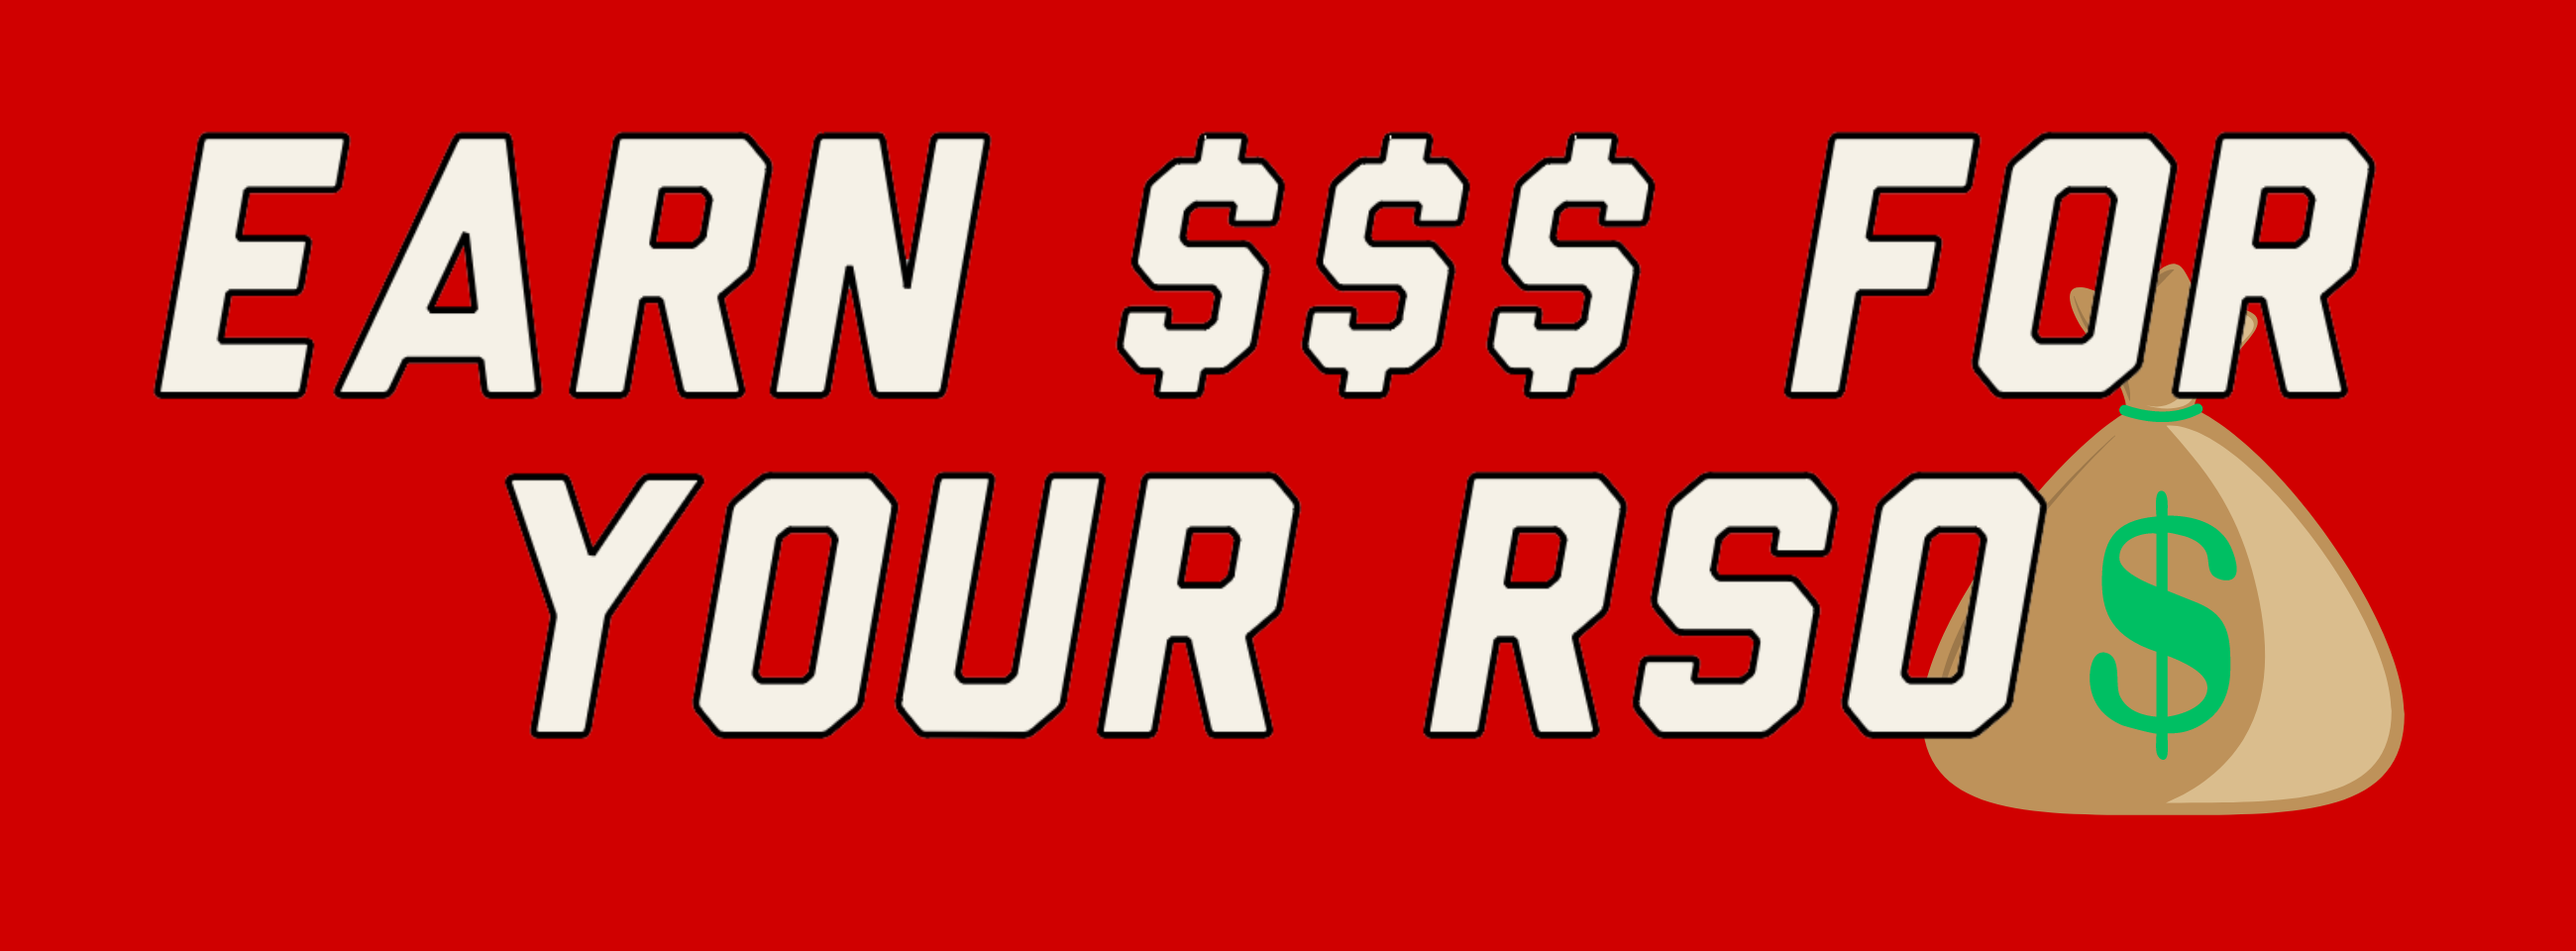 Earn $$$ For Your RSO